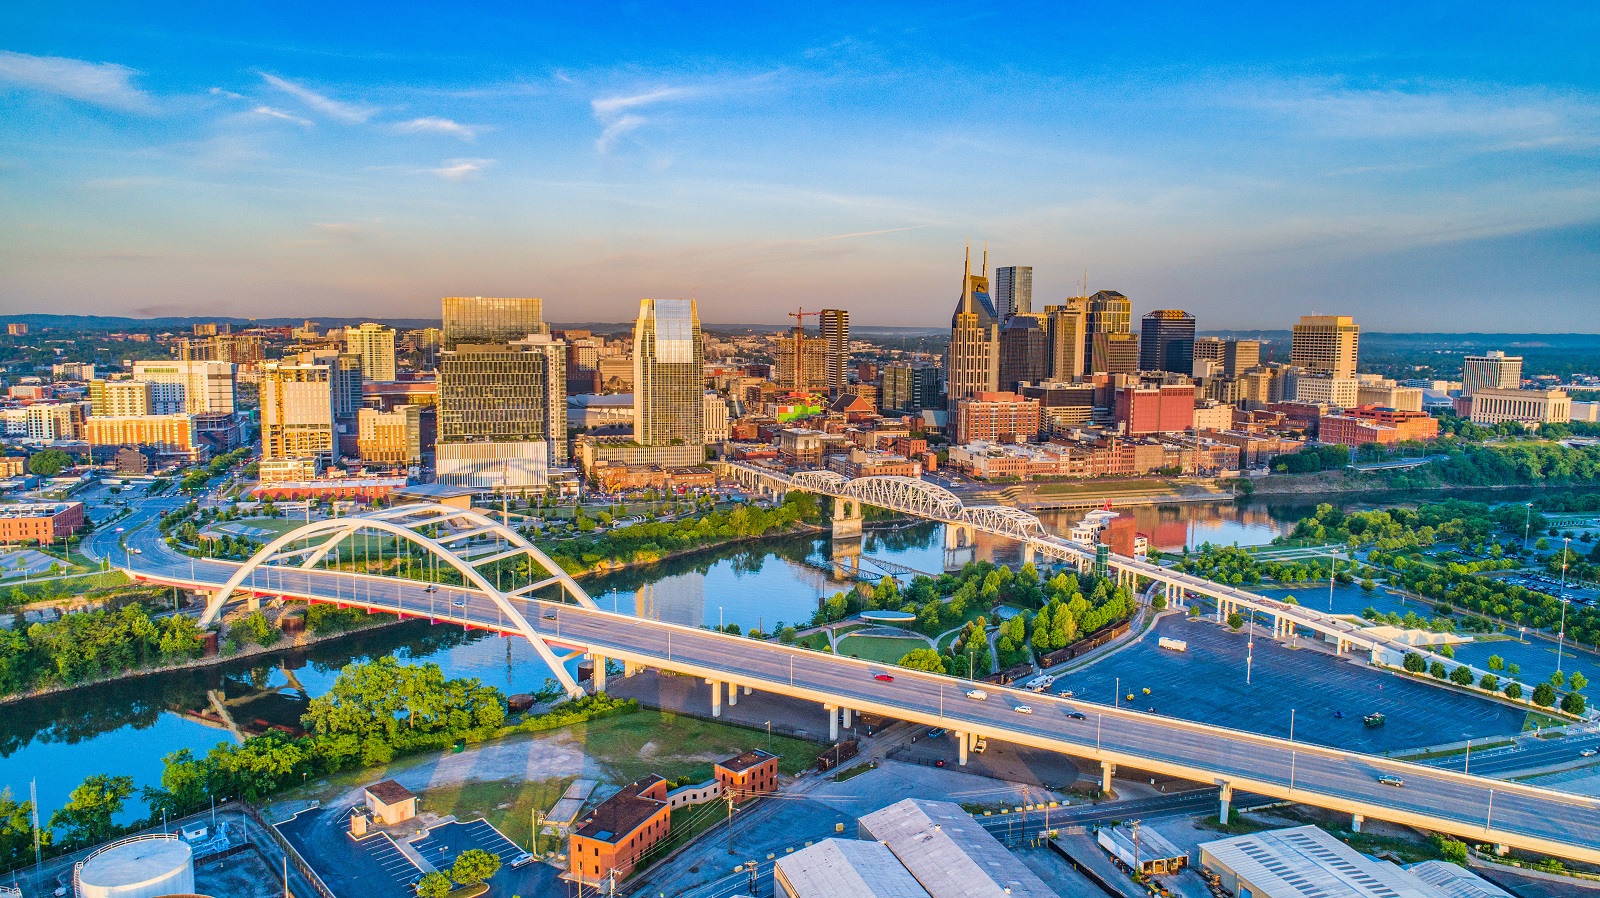 <p class="wp-caption-text">Image Credit: Shutterstock / Kevin Ruck</p>  <p><span>Nashville may be growing, but it still offers a driver-friendly environment with manageable traffic and plenty of parking, especially outside of the downtown area.</span></p>